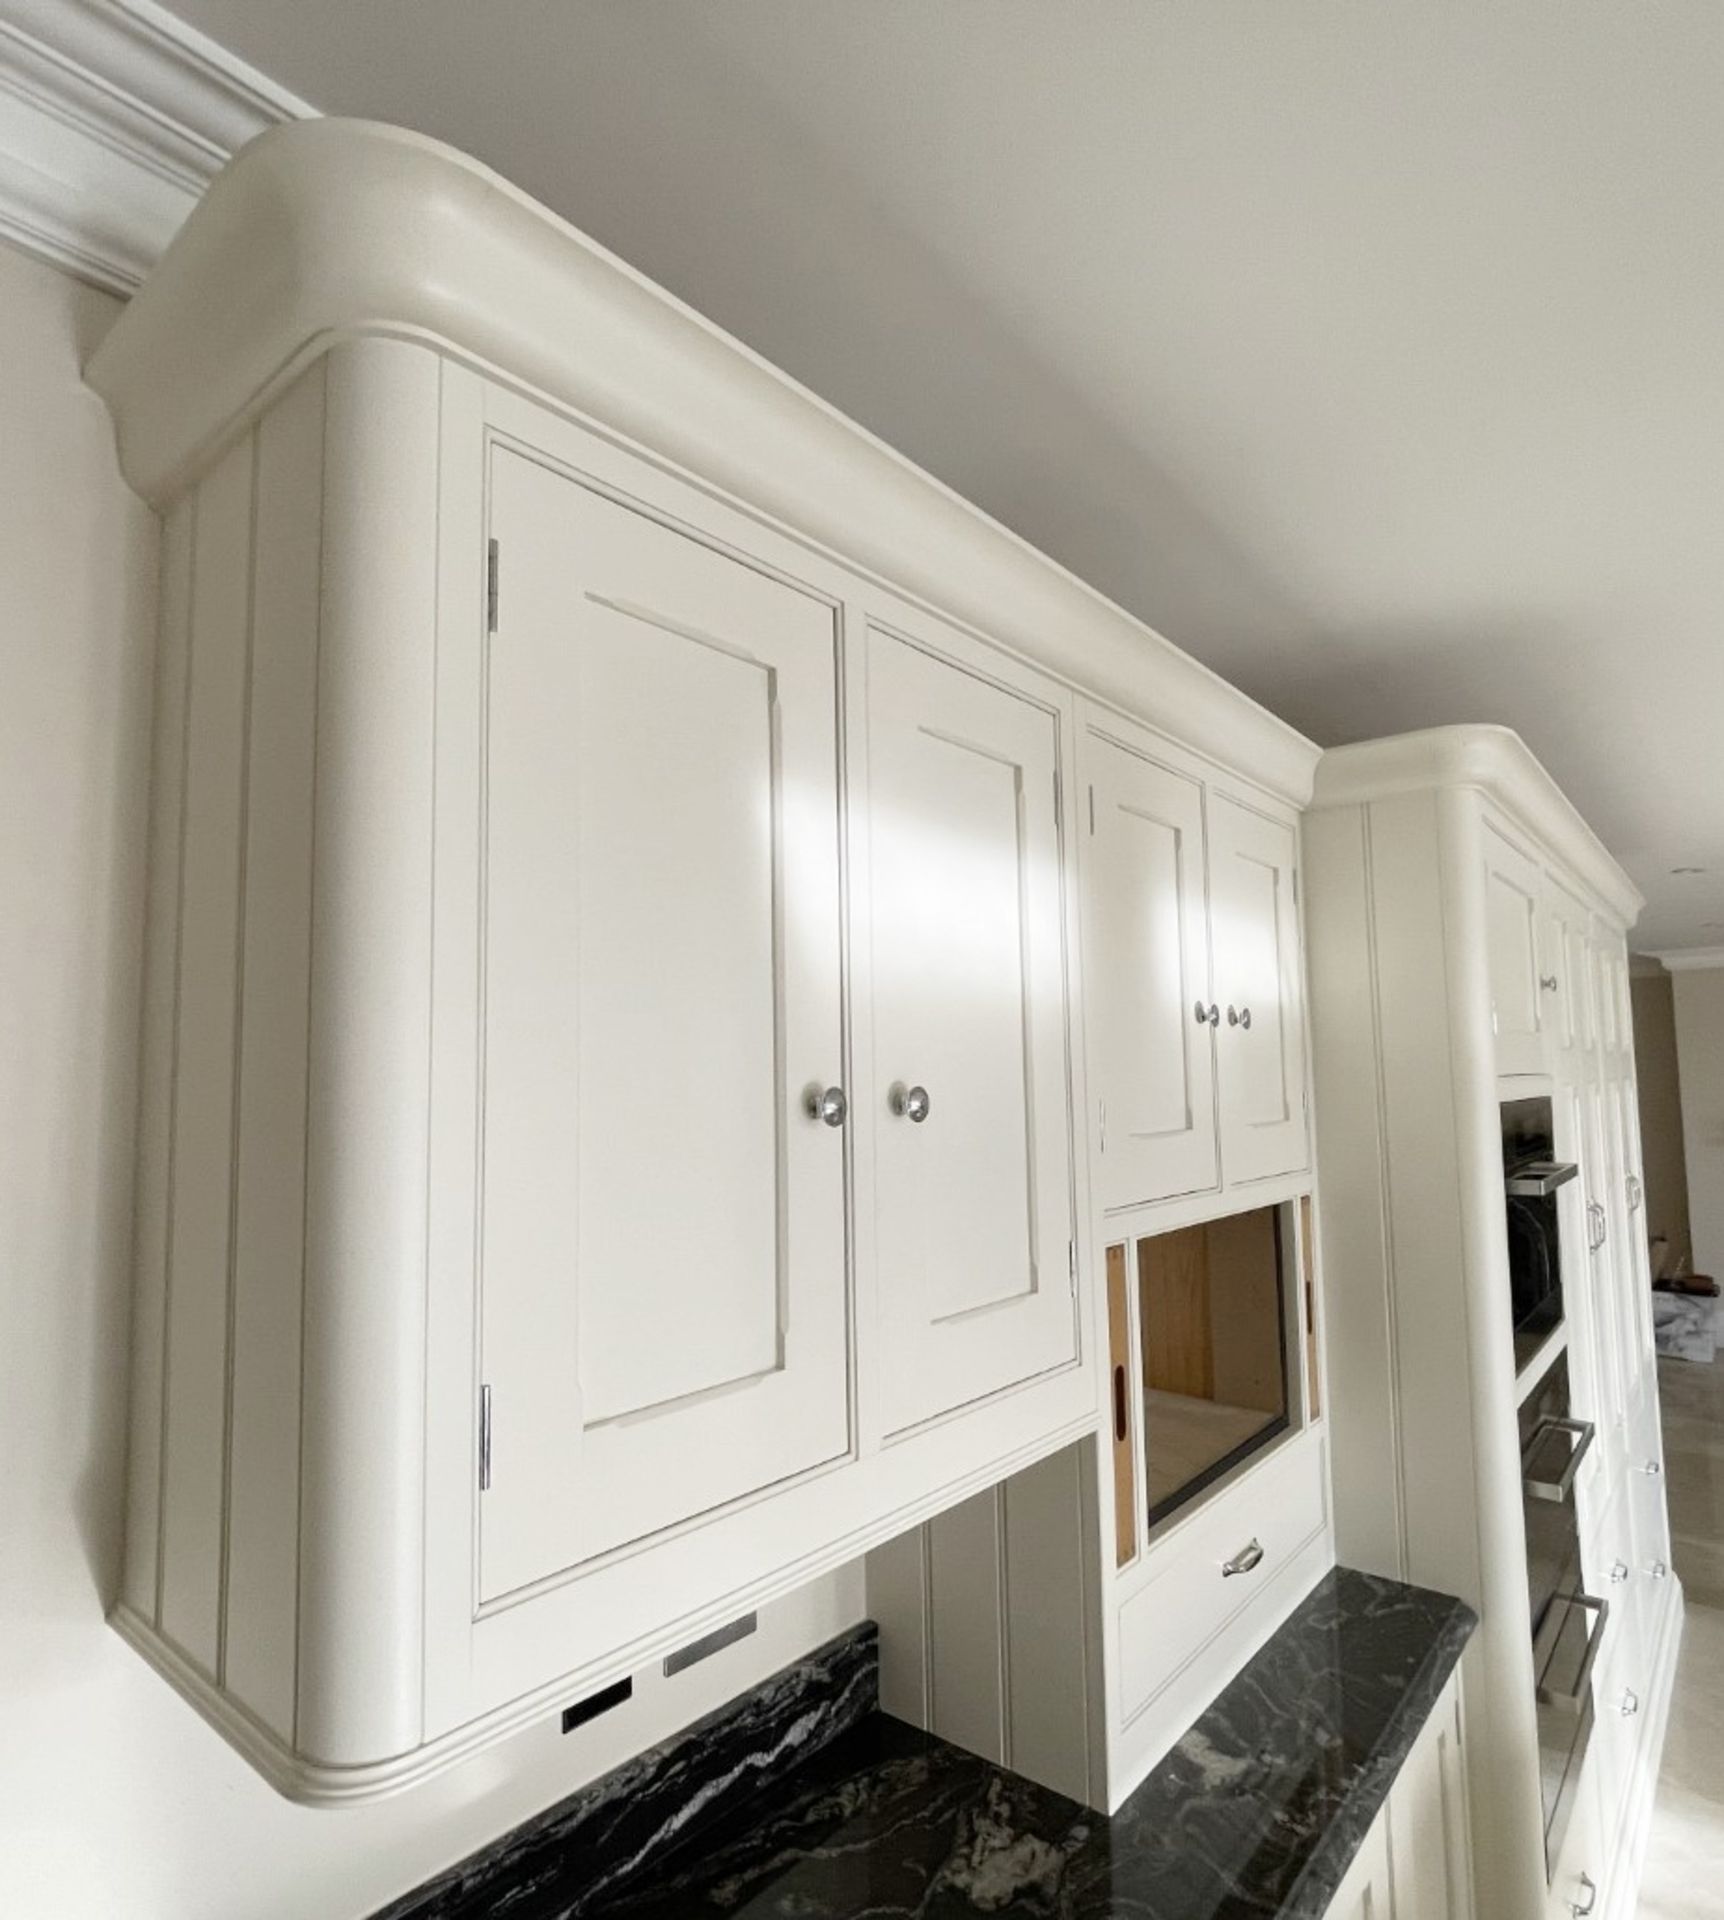 1 x Bespoke Handcrafted Shaker-style Fitted Kitchen Marble Surfaces, Island & Miele Appliances - Image 132 of 221